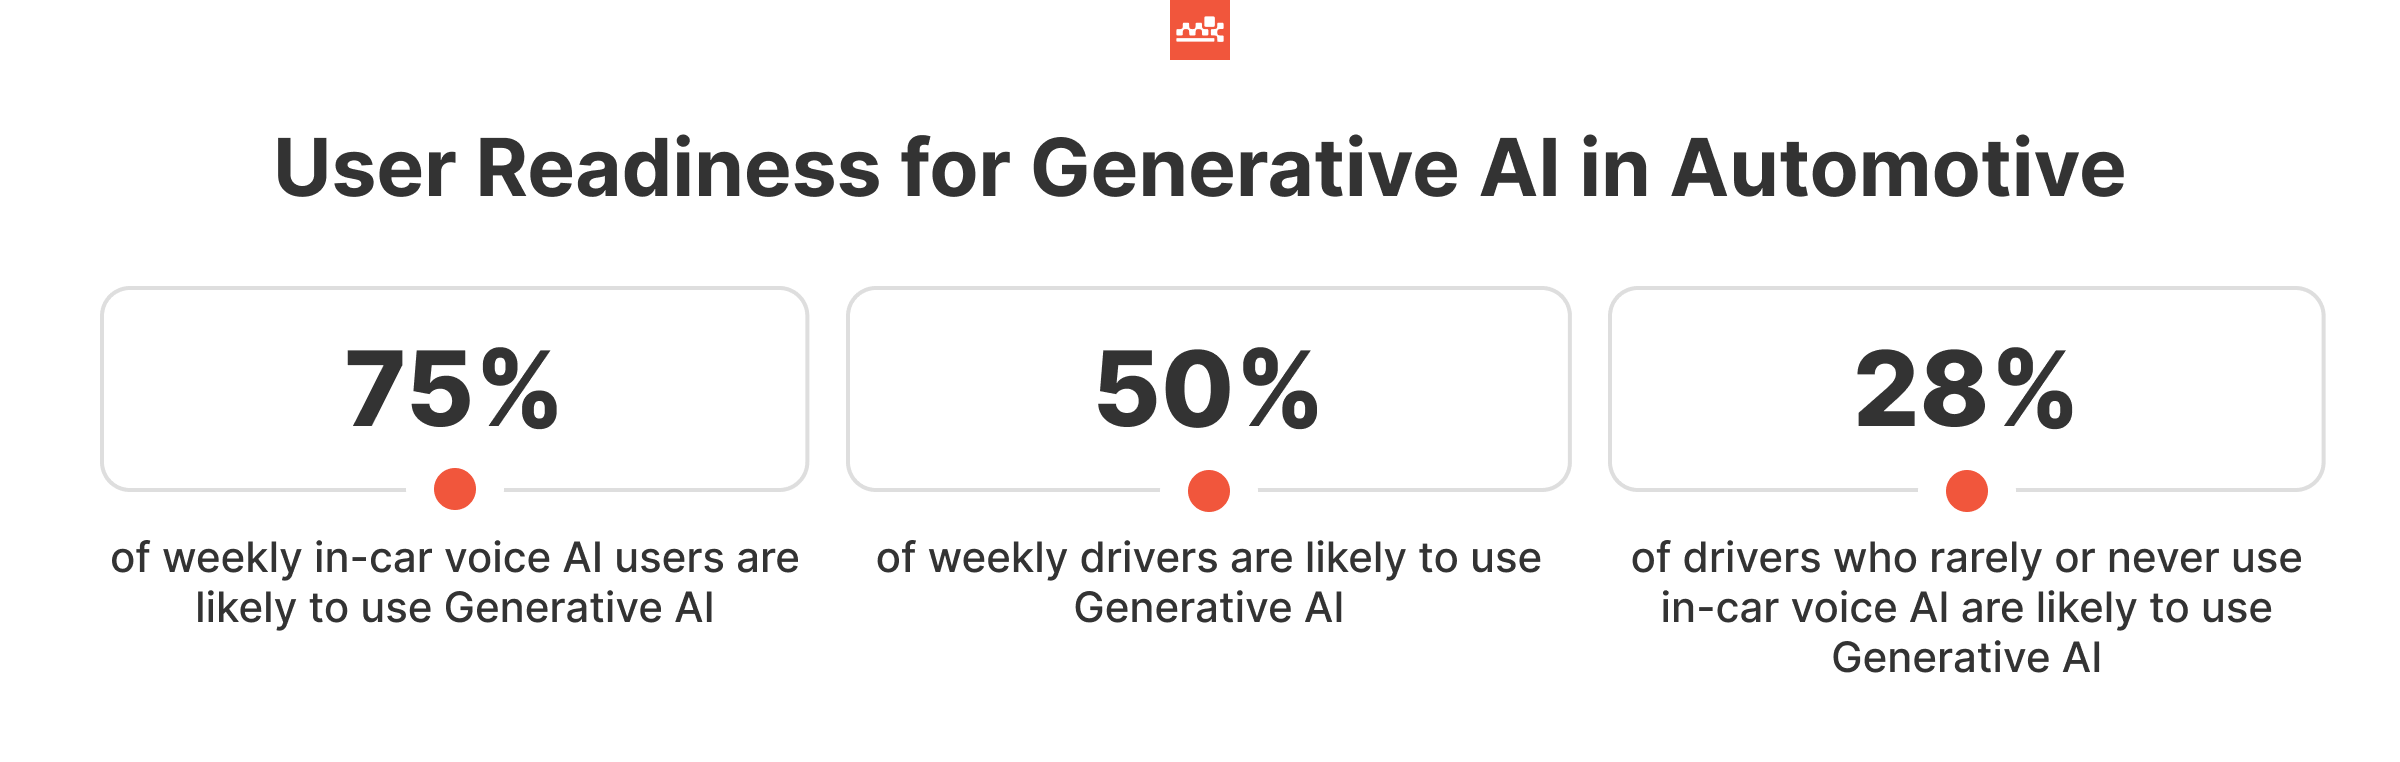 User Readiness for Gen AI in Automotive